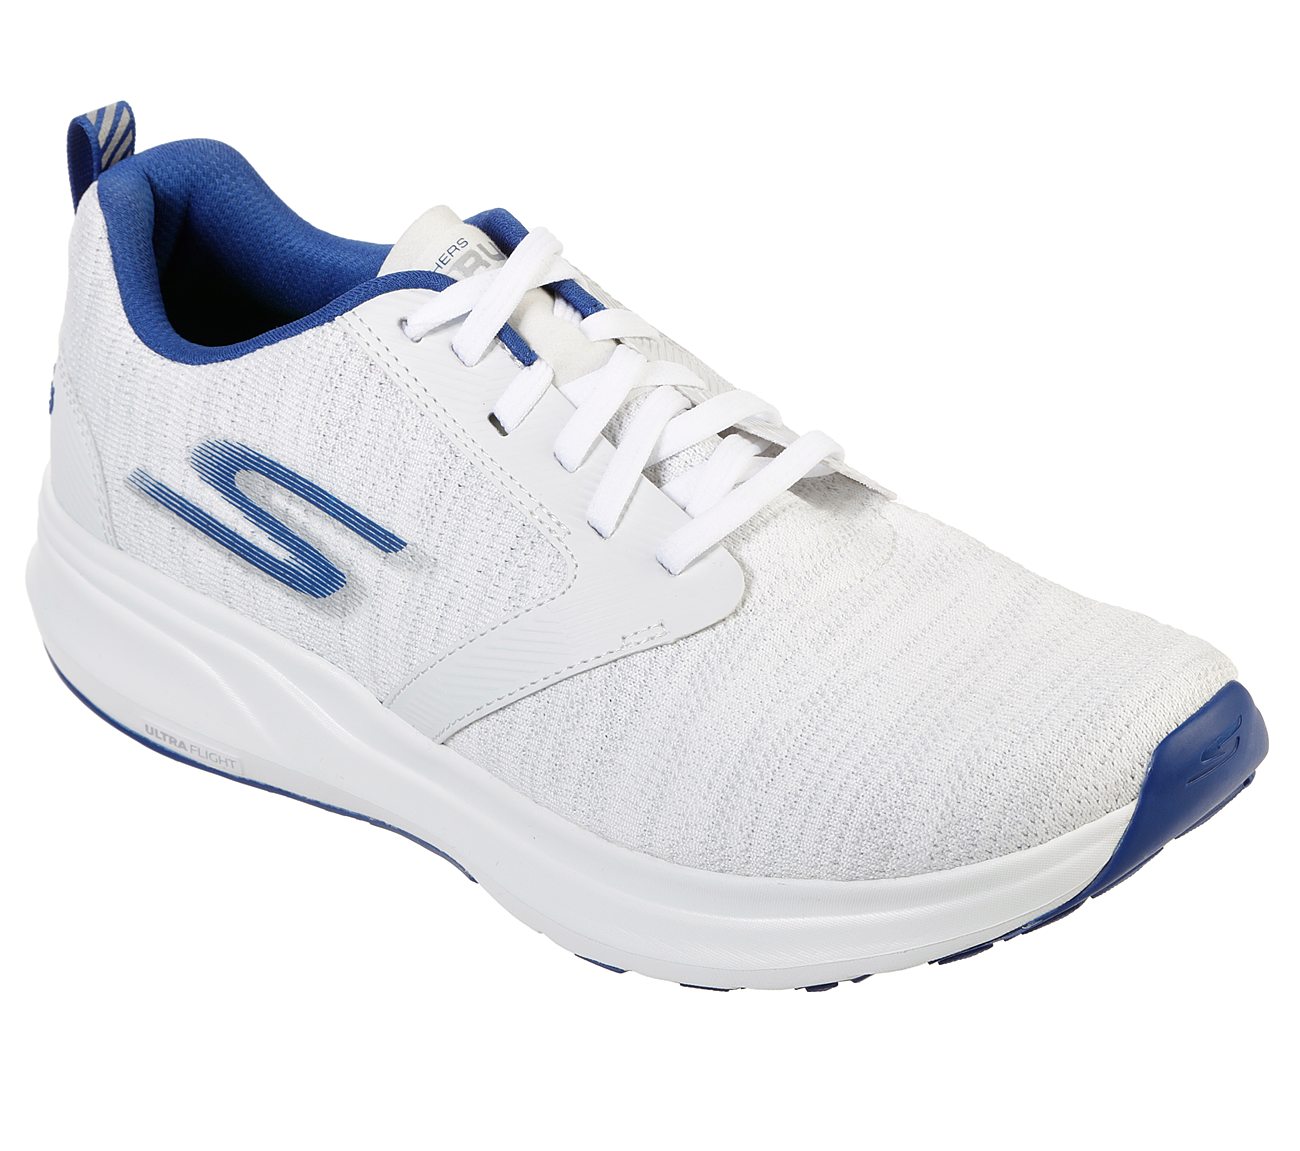 Los Angeles 2019 Skechers Performance Shoes